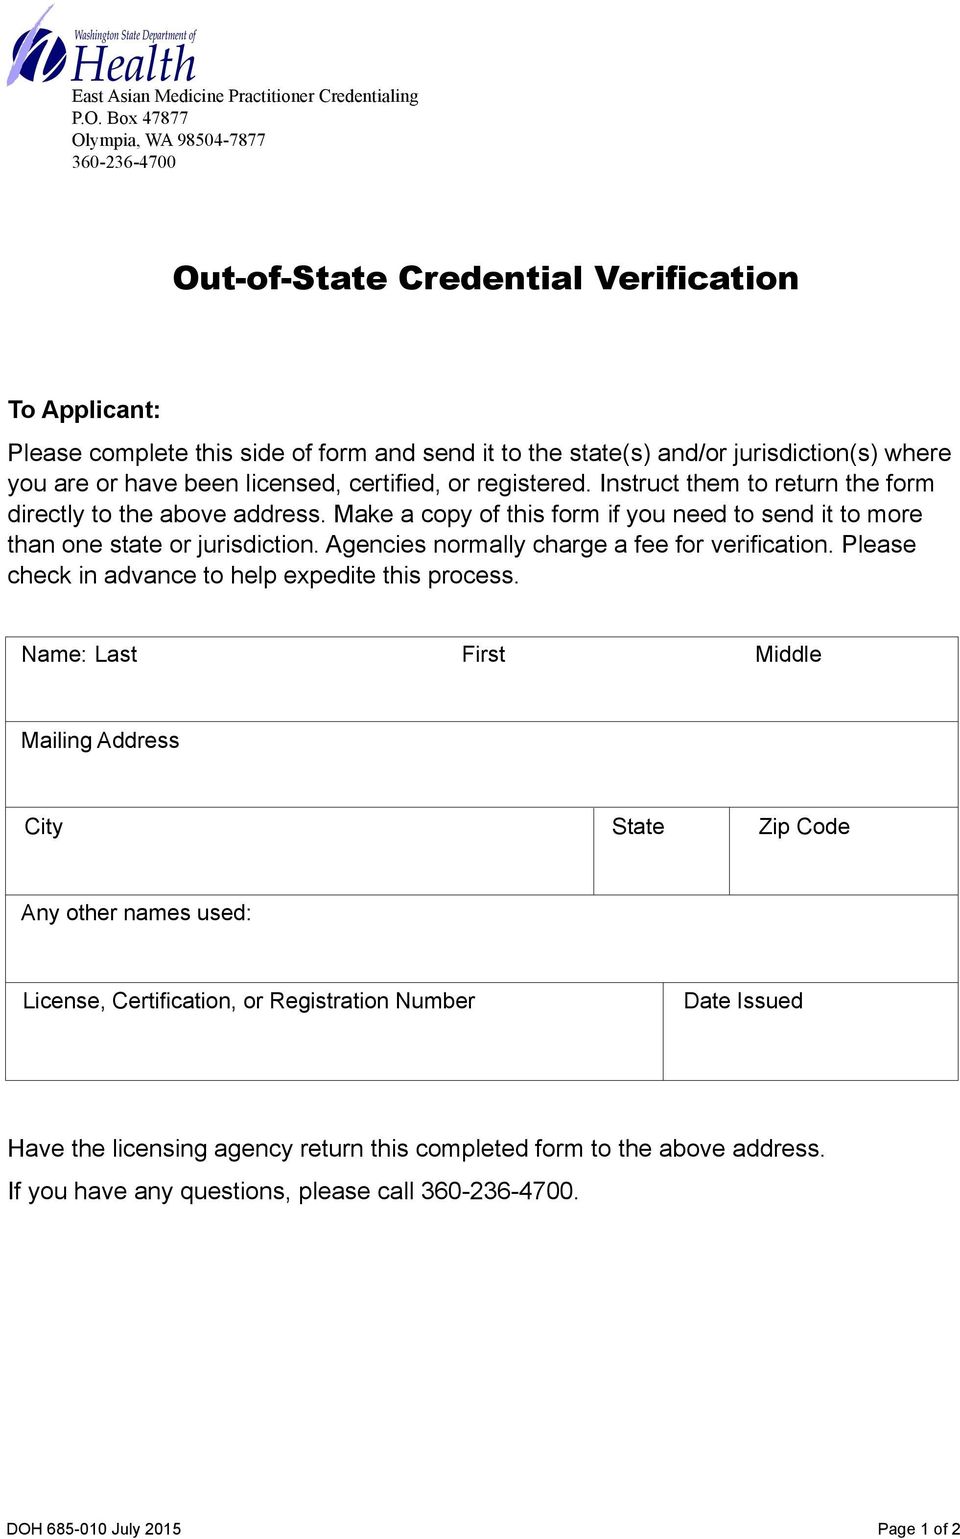 have been licensed, certified, or registered. Instruct them to return the form directly to the above address. Make a copy of this form if you need to send it to more than one state or jurisdiction.